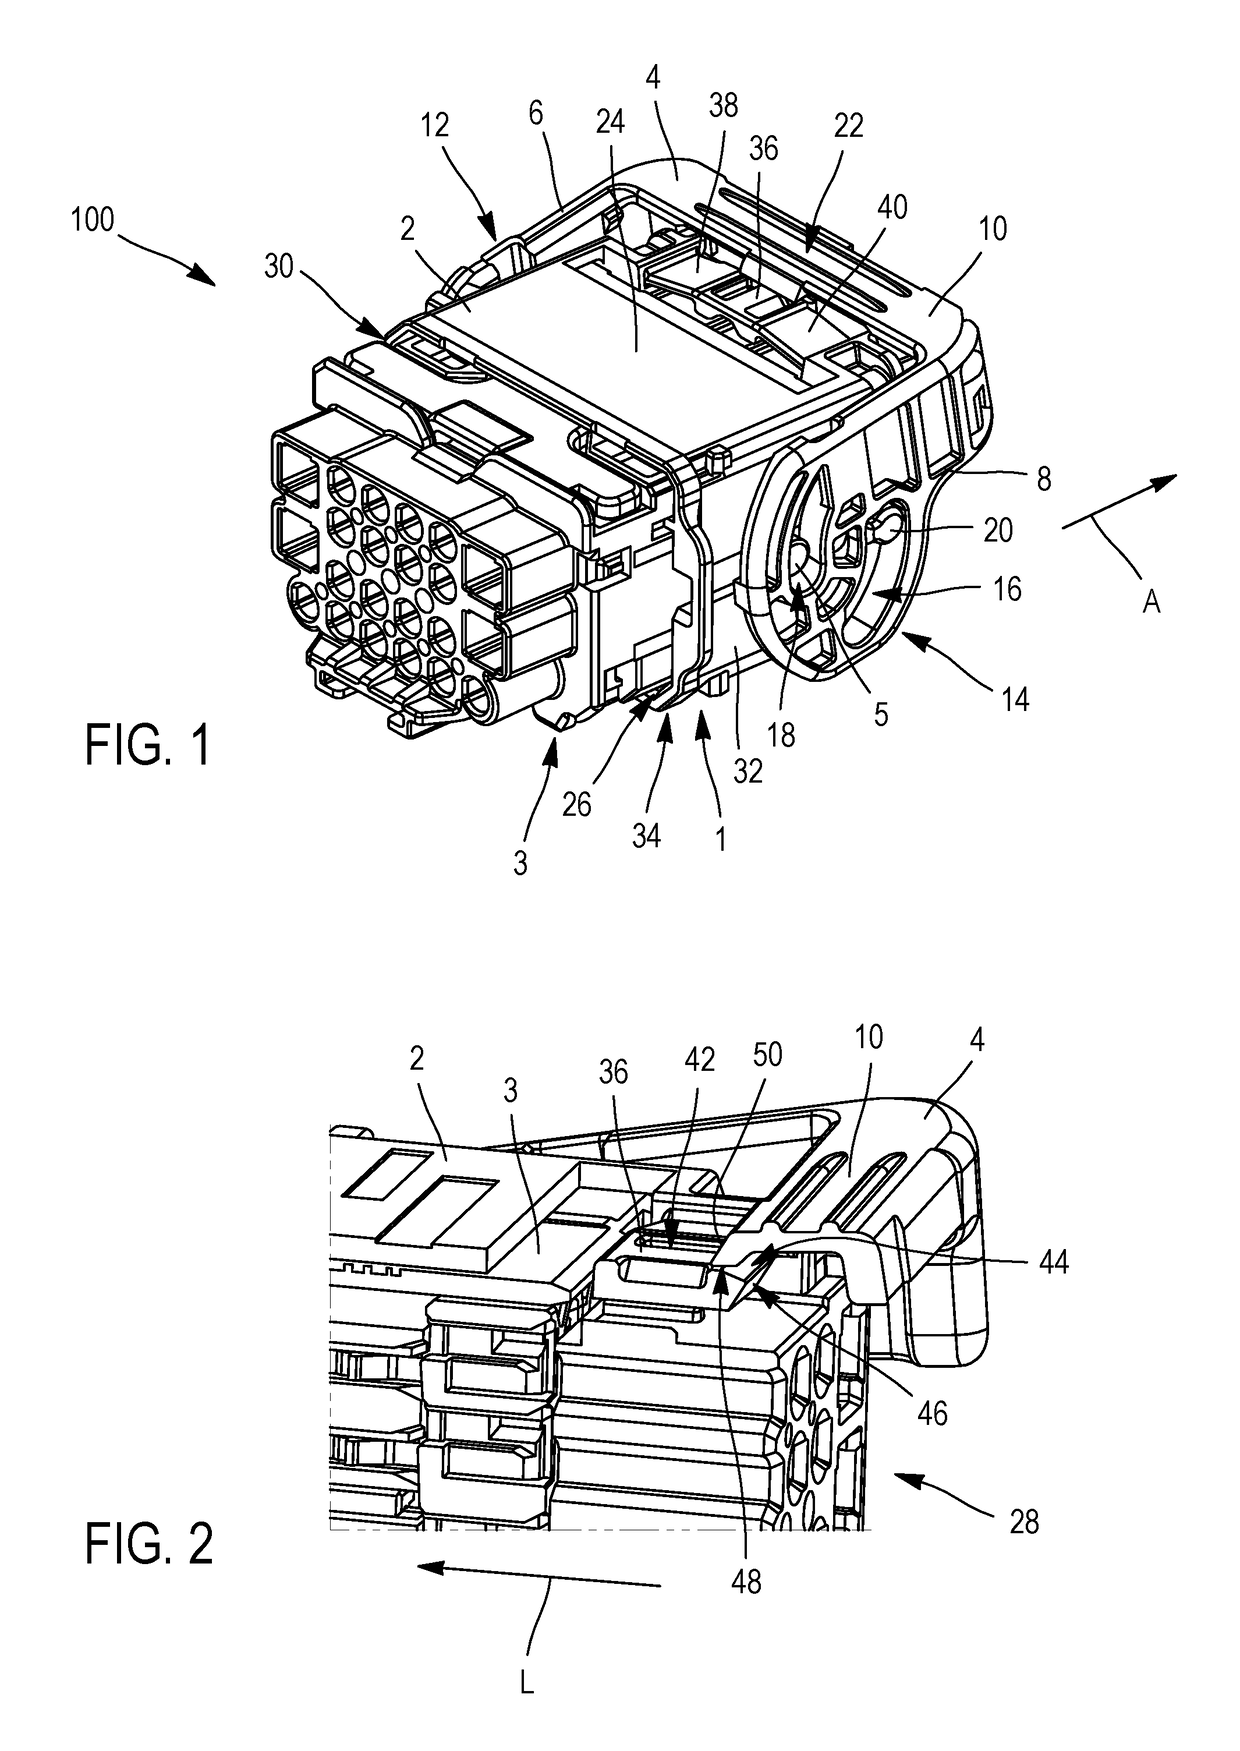 Connector having locking of the lever for facilitating the connection